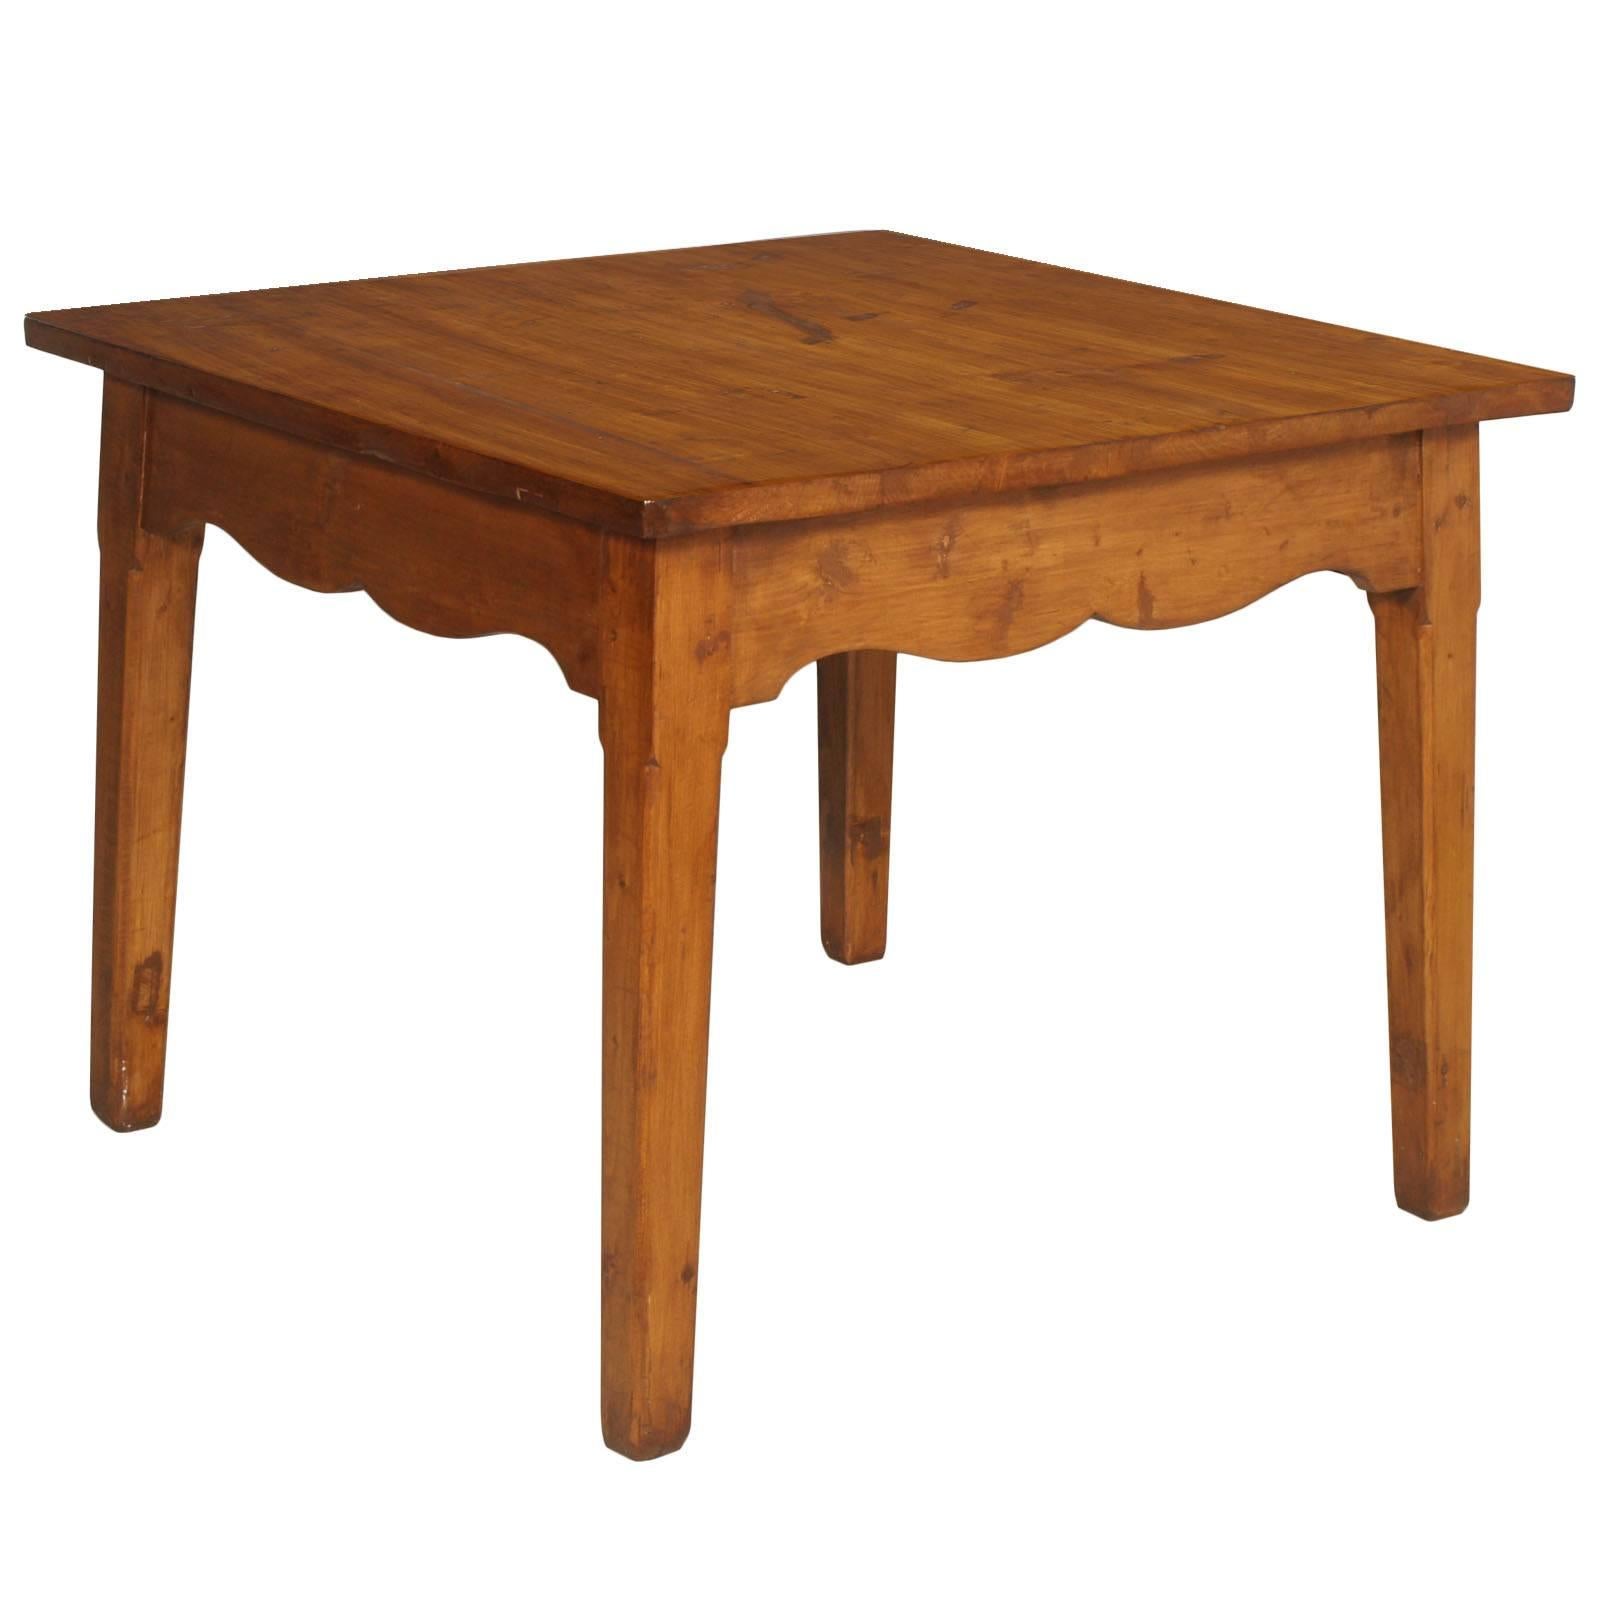 Tyrolean Square Table in Solid Larch Rustic Mountain Style Art Deco, 1920s